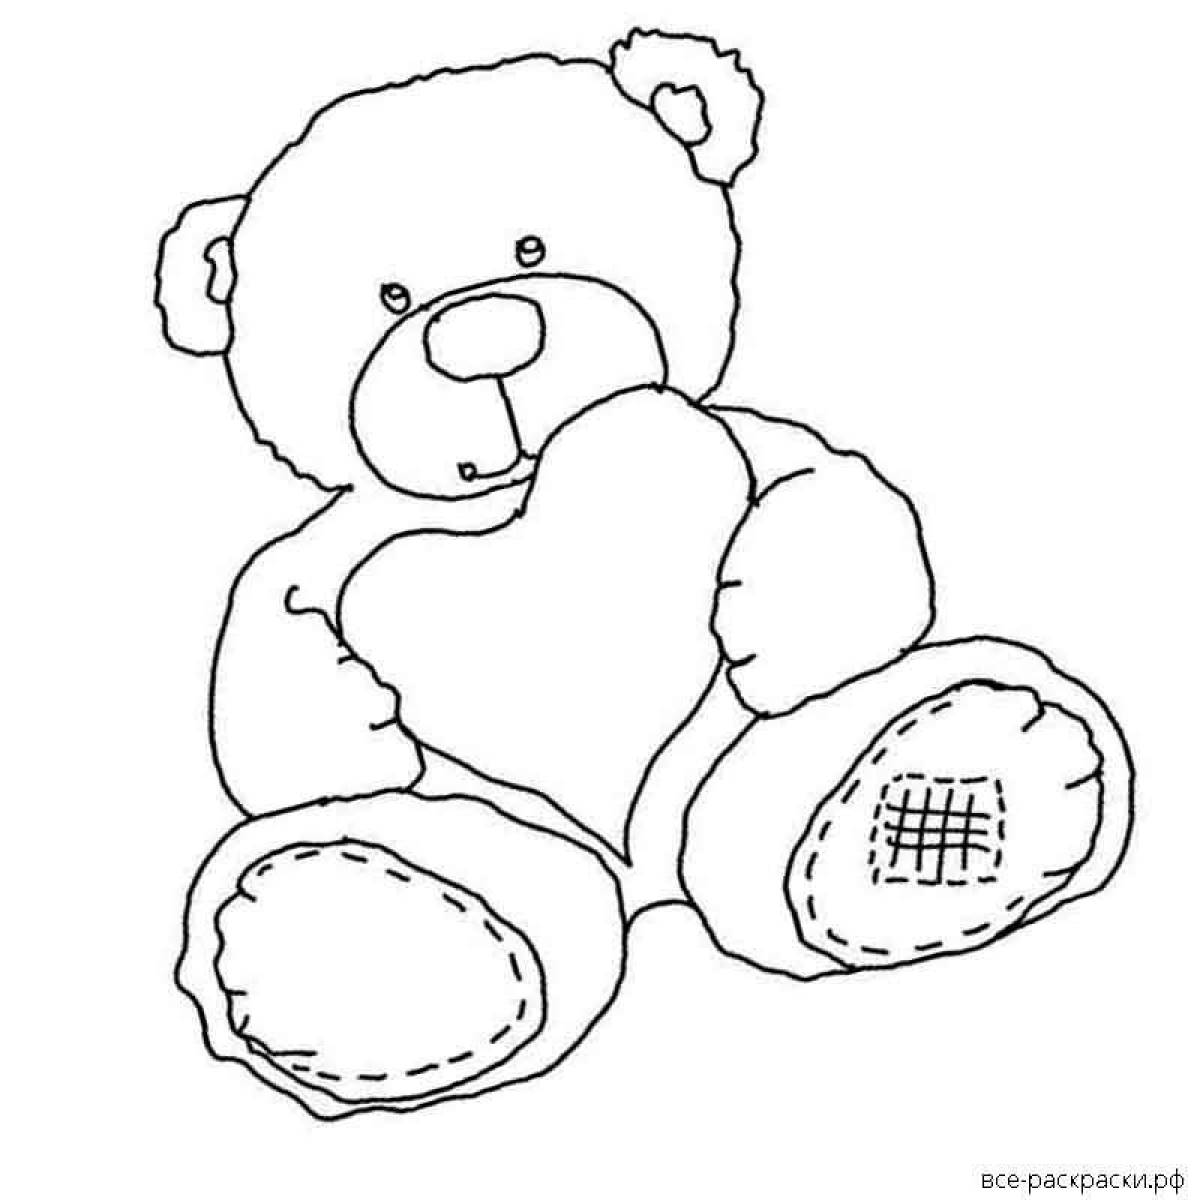 Wrigley bear coloring page